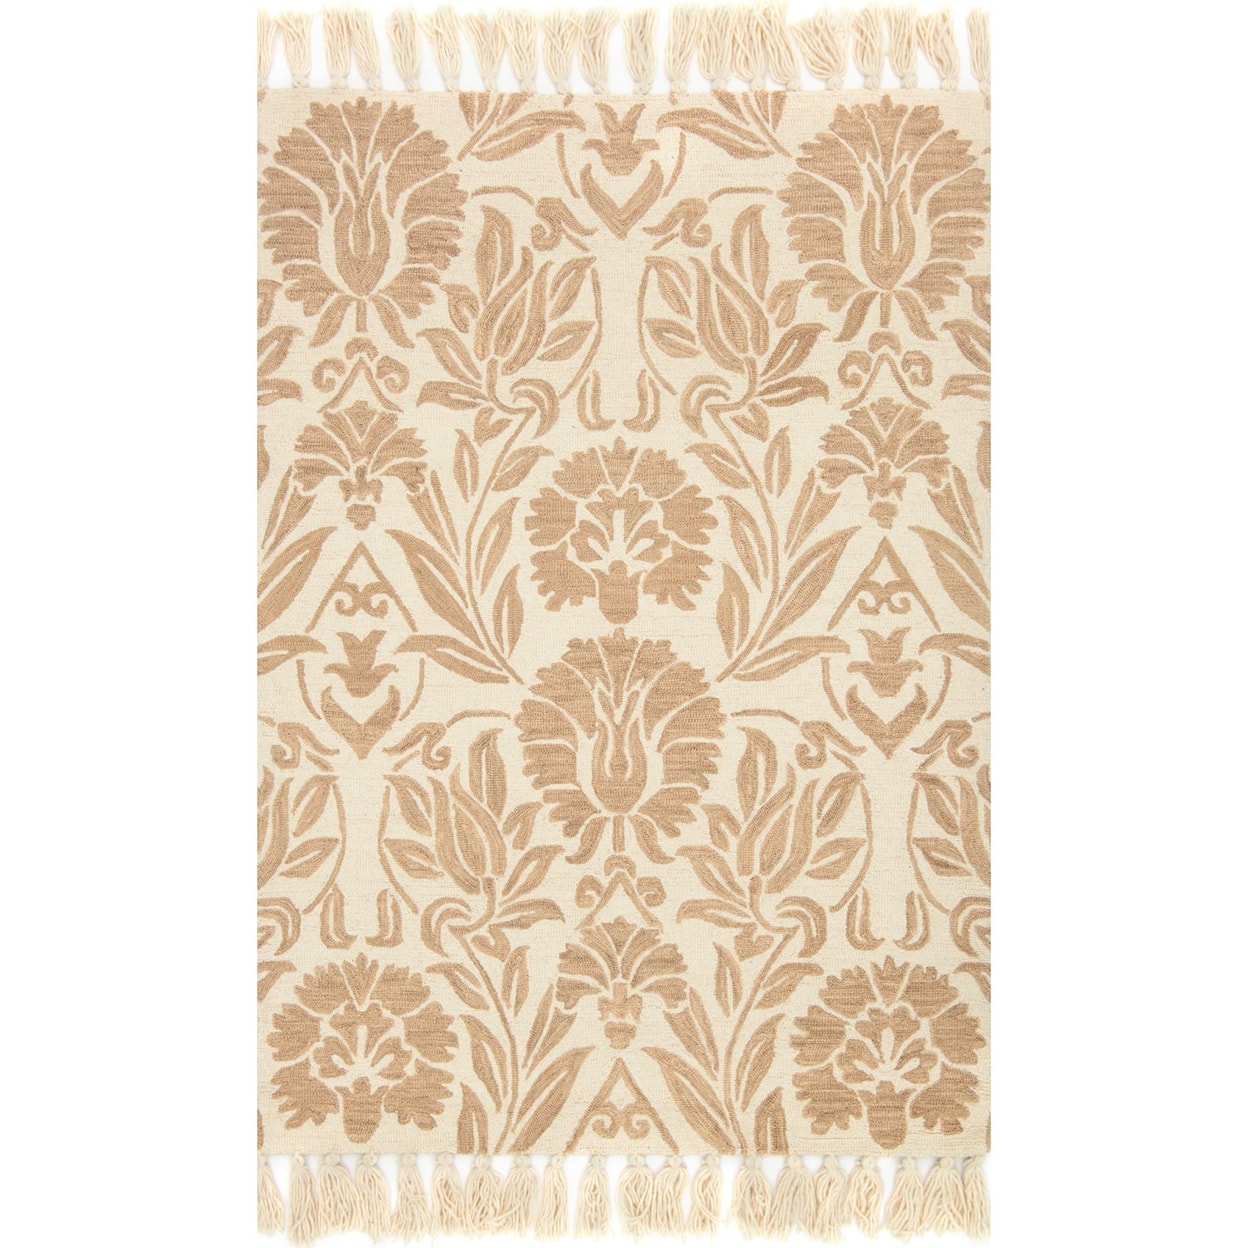 Magnolia Home by Joanna Gaines for Loloi Jozie Day 2' 3" x 3' 9" Rectangle Rug